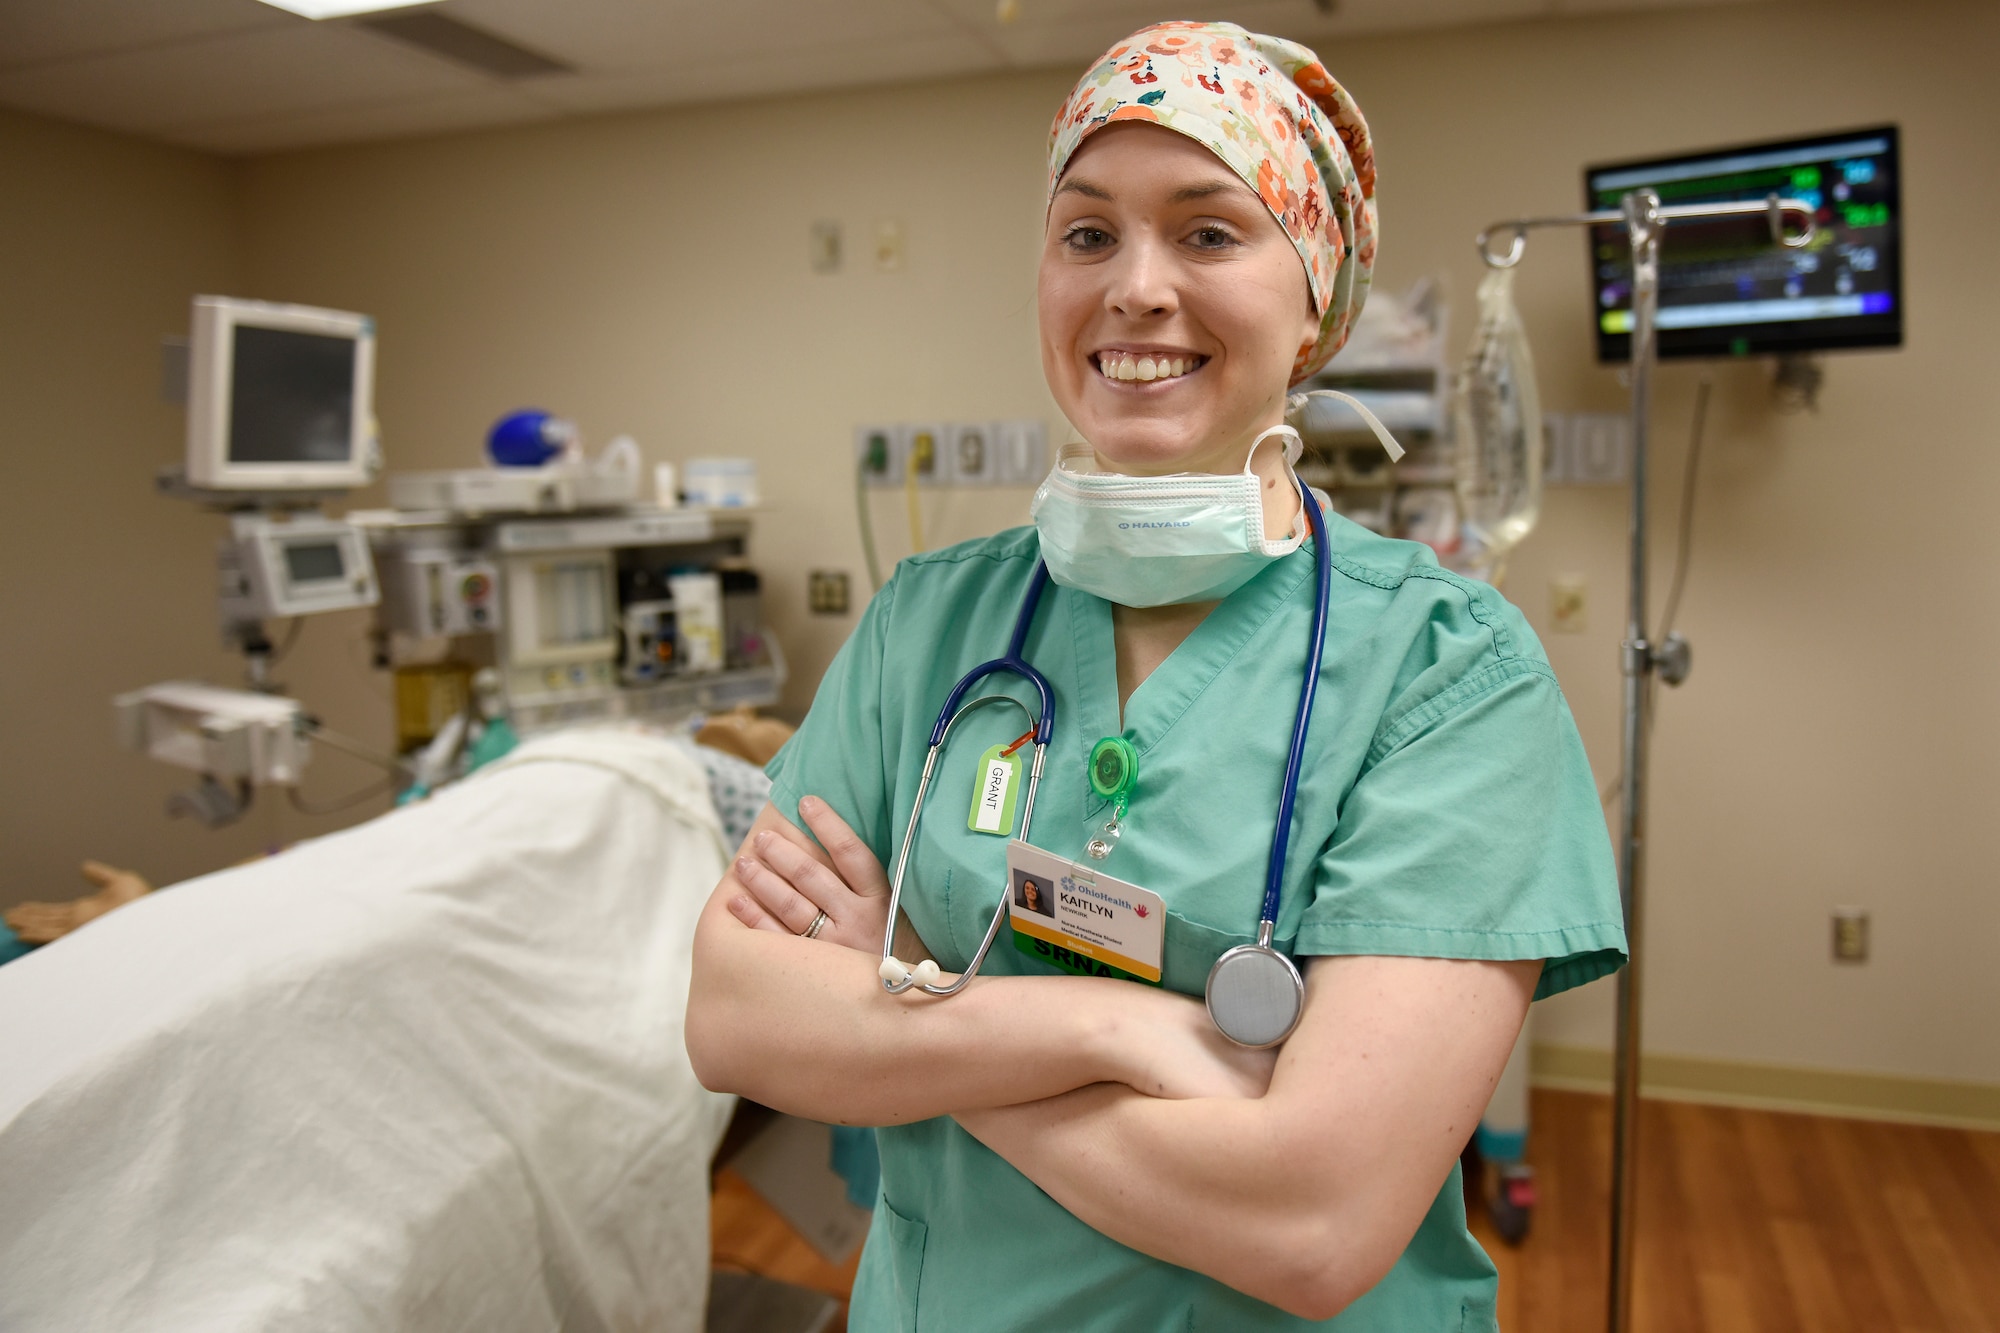 U.S. Air Force Capt. Kaitlyn Newkirk, a clinical nurse assigned to the Ohio Air National Guard’s 180th Fighter Wing, poses for a portrait March 18, 2019, at Grant Medical Center in Columbus, Ohio. As a clinical nurse, she draws blood, gives shots, and teaches self-aid and buddy care to all 180FW Airmen to ensure they have the skills to provide life-saving first aid during the often chaotic and high-stress situations they might face in deployed environments.